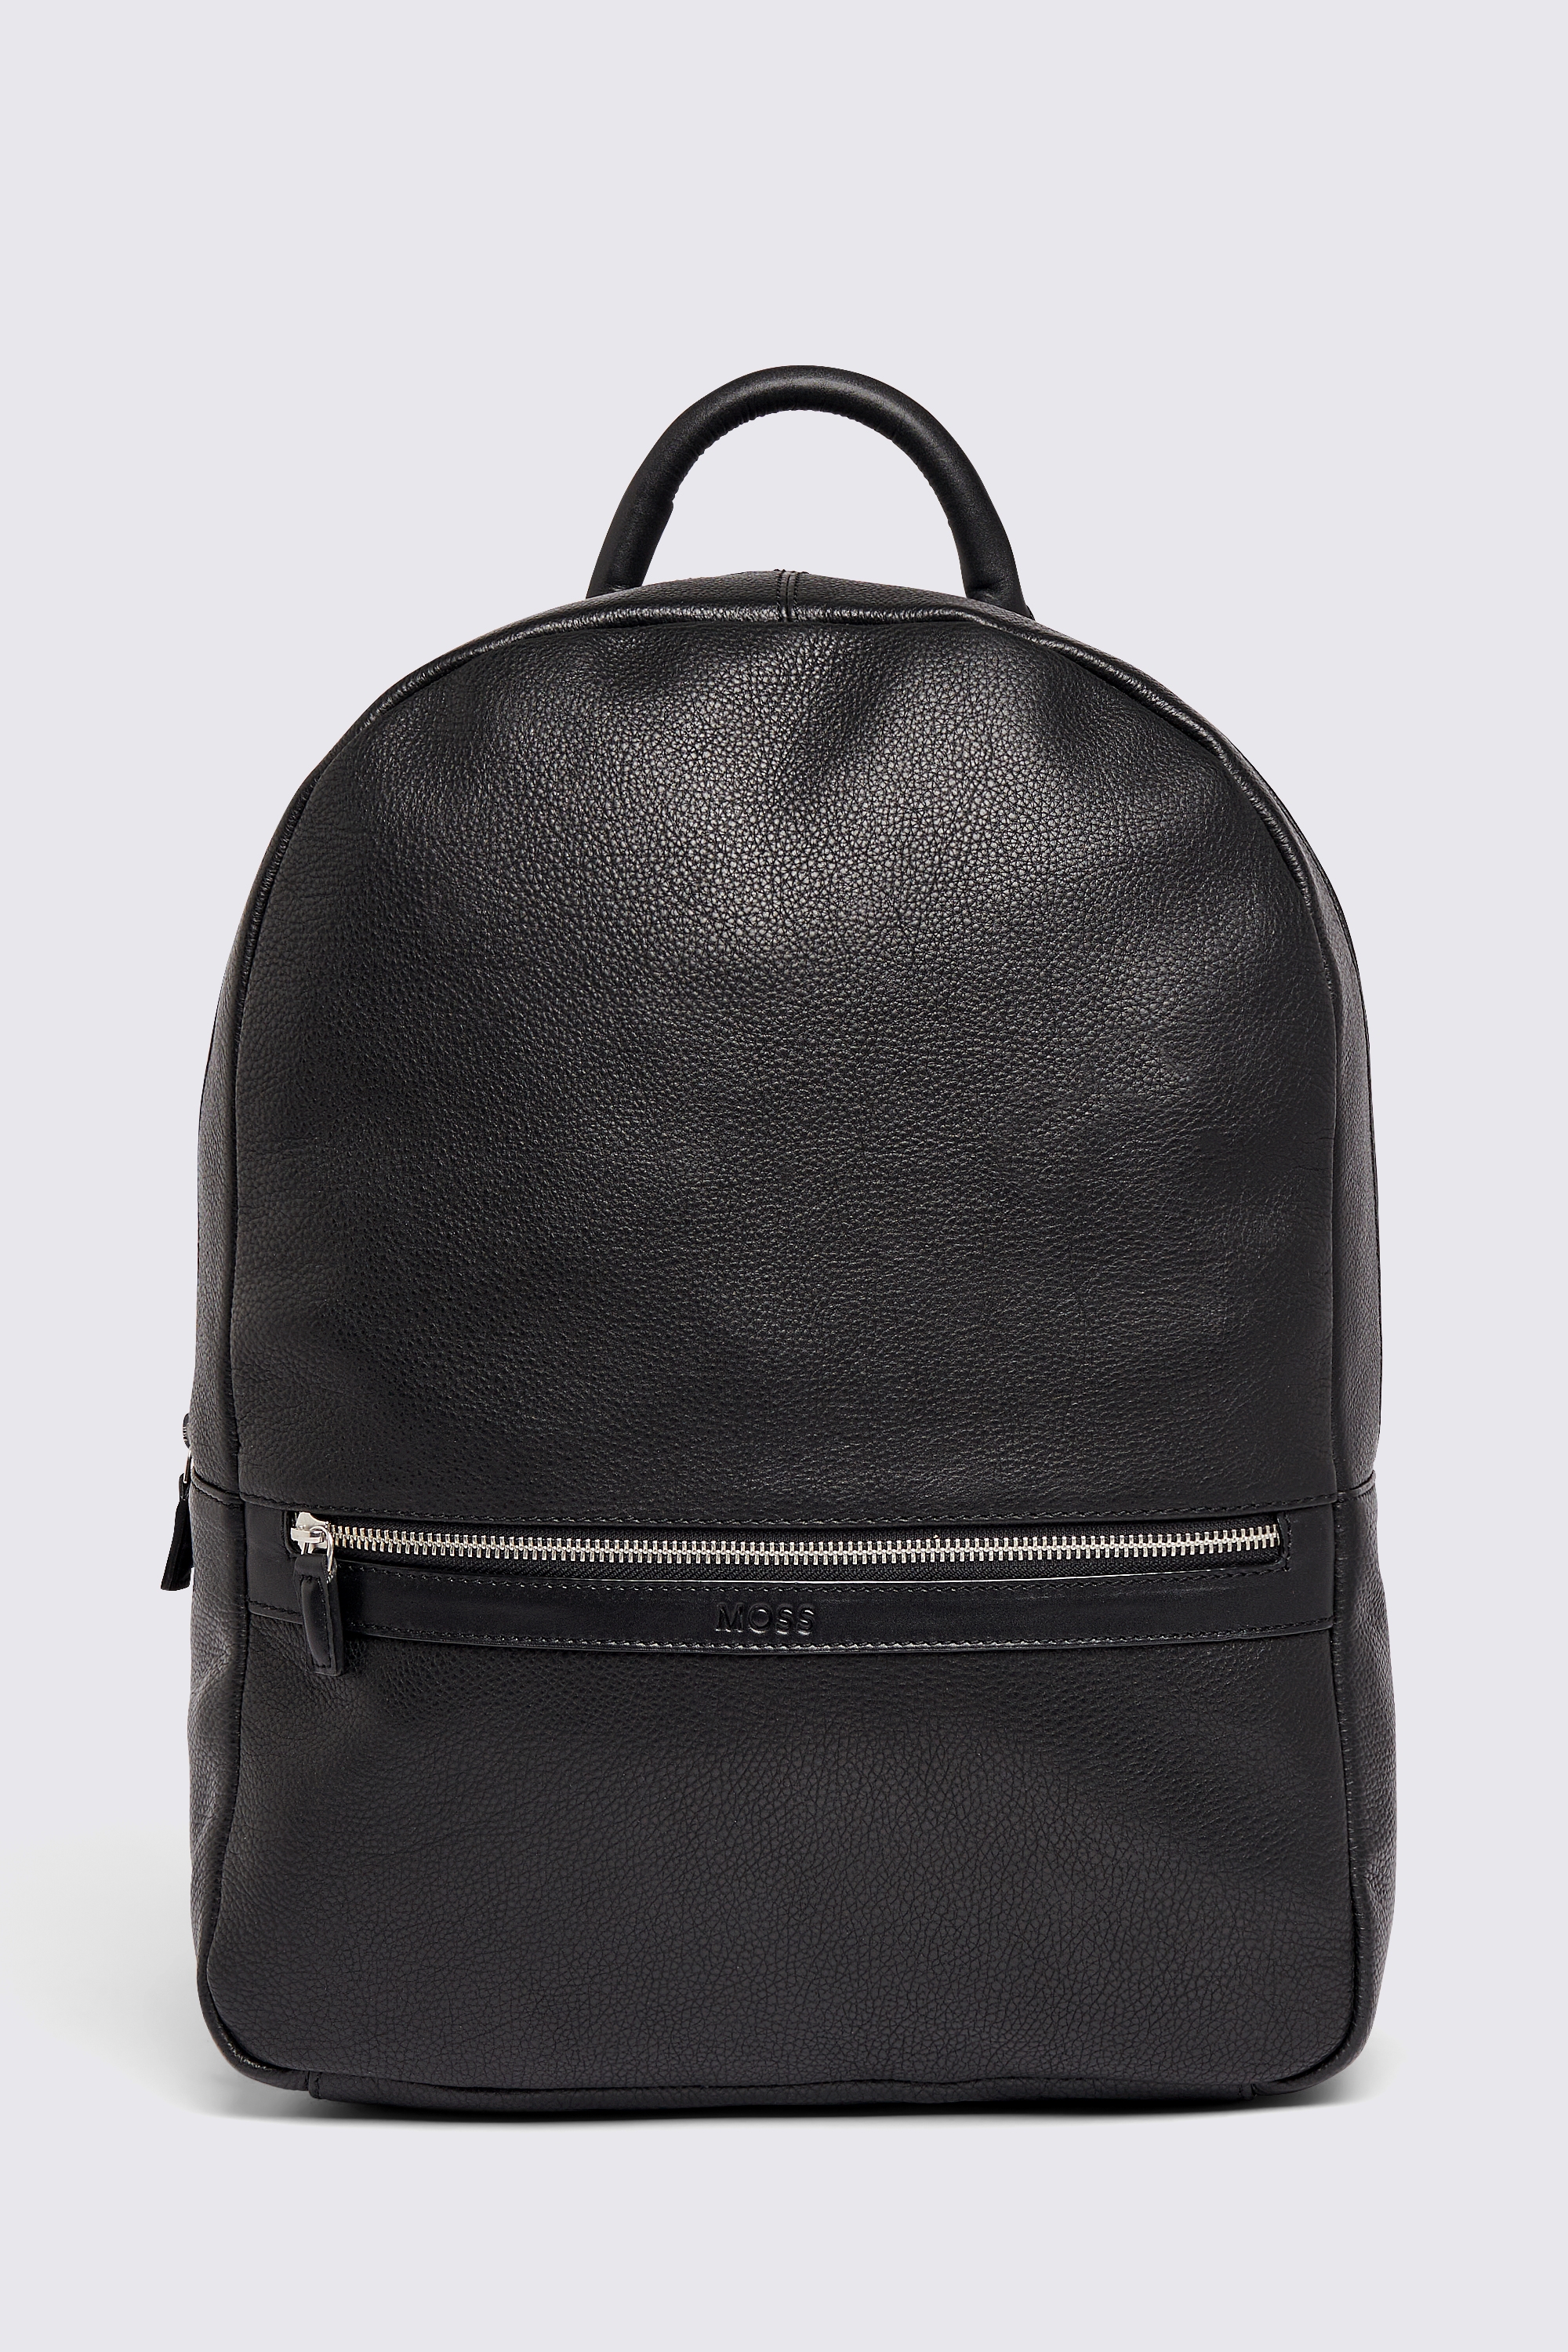 Black Grained Leather Backpack